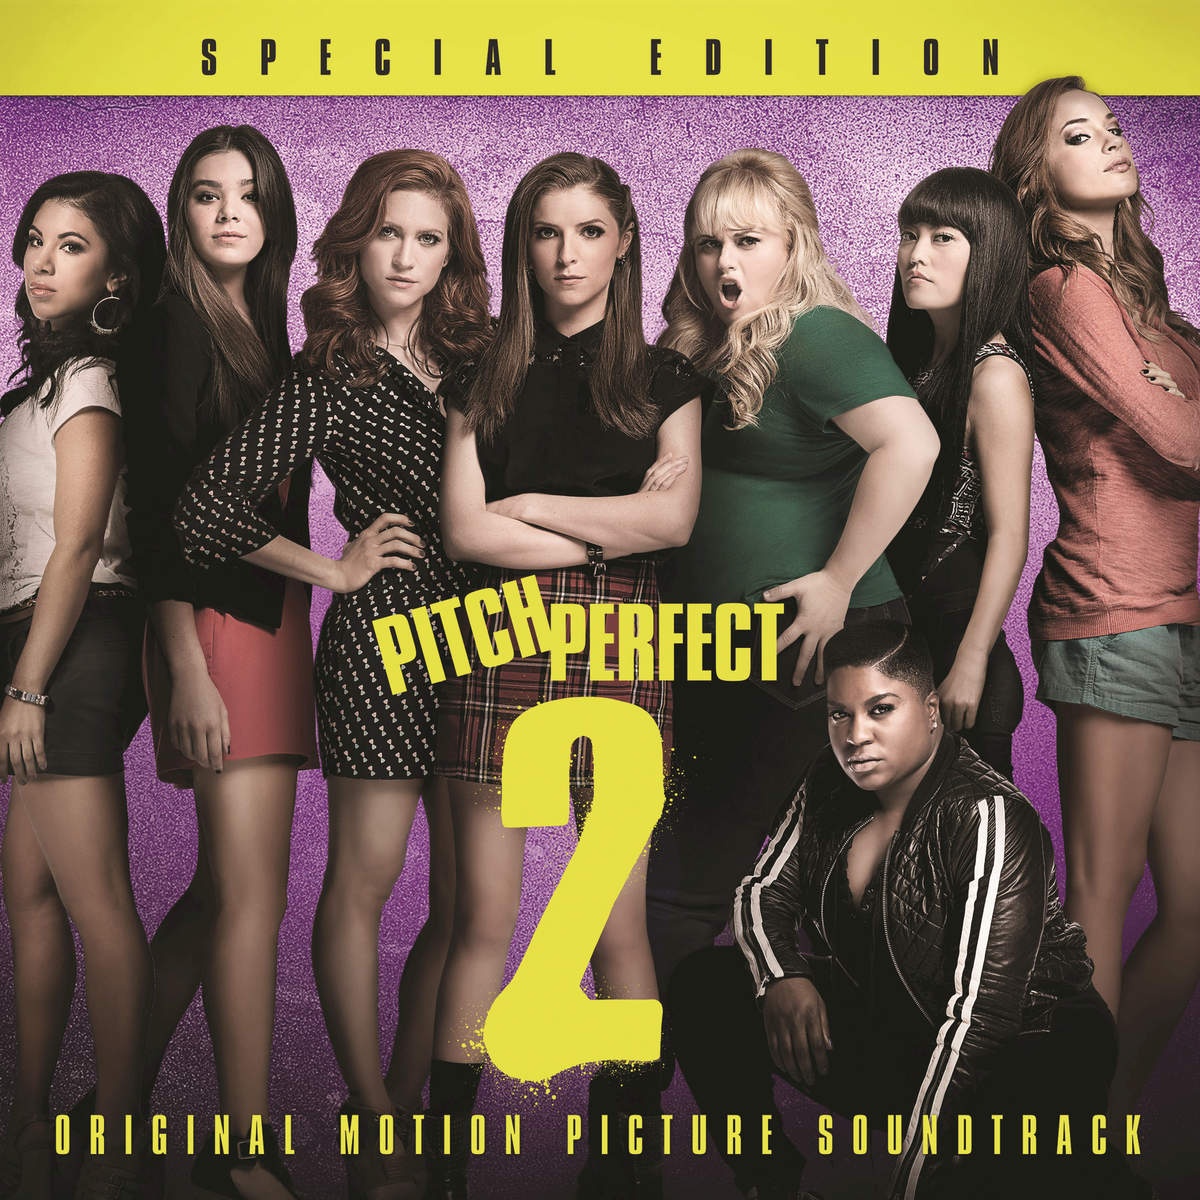 Lollipop (From "Pitch Perfect 2" Soundtrack)